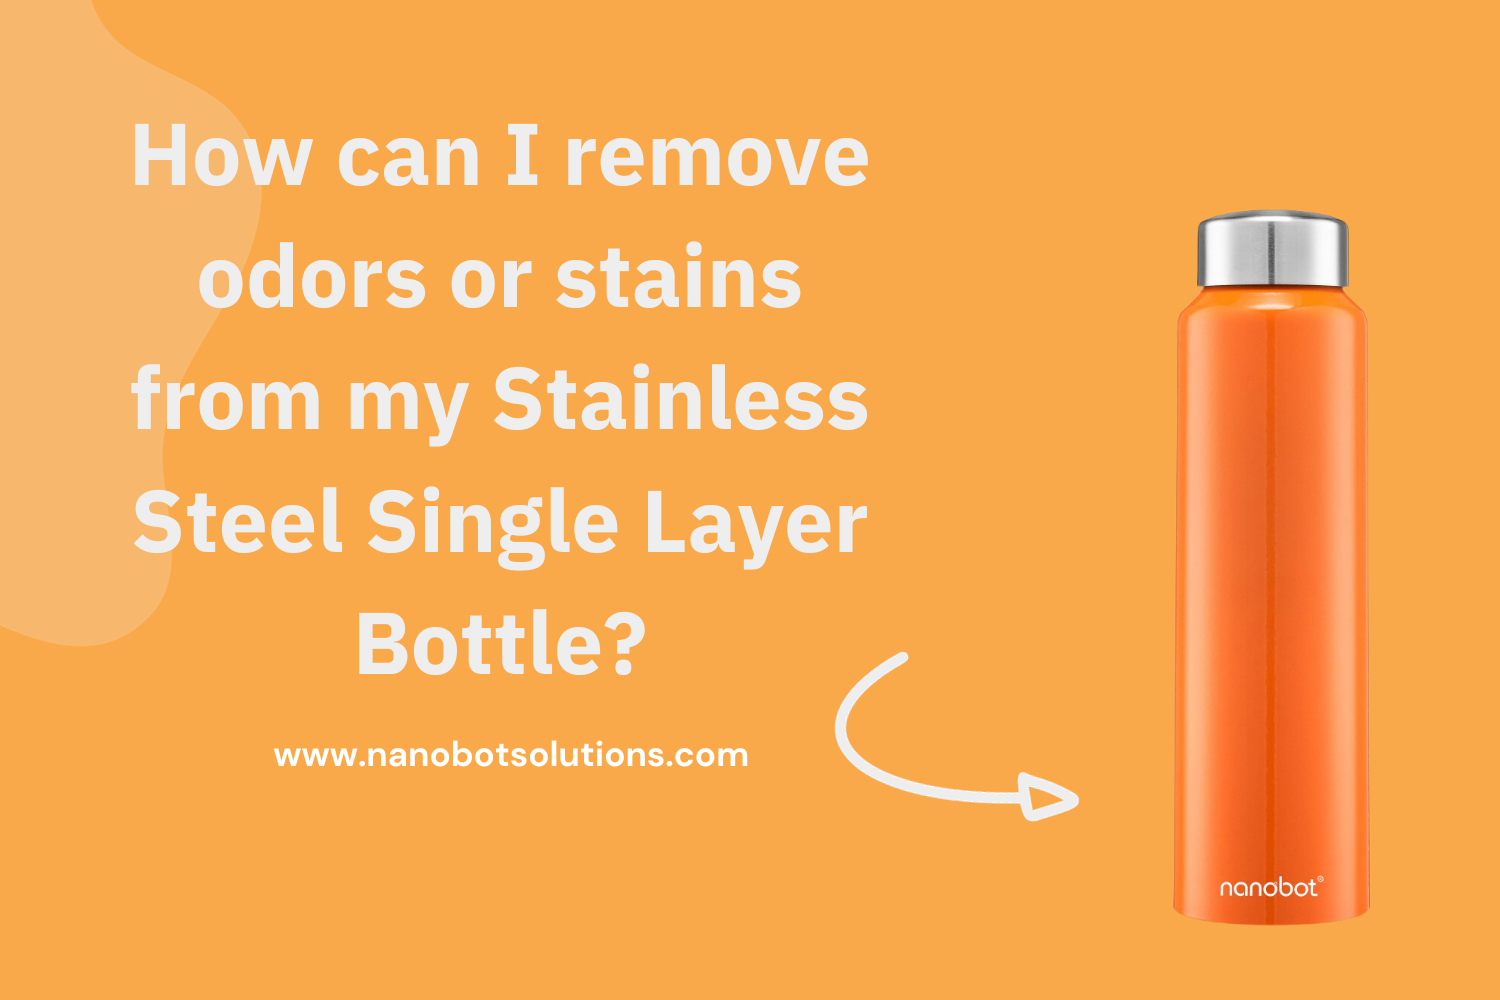 How can I remove odors or stains from my Stainless Steel Single Layer Bottle | Nanobot